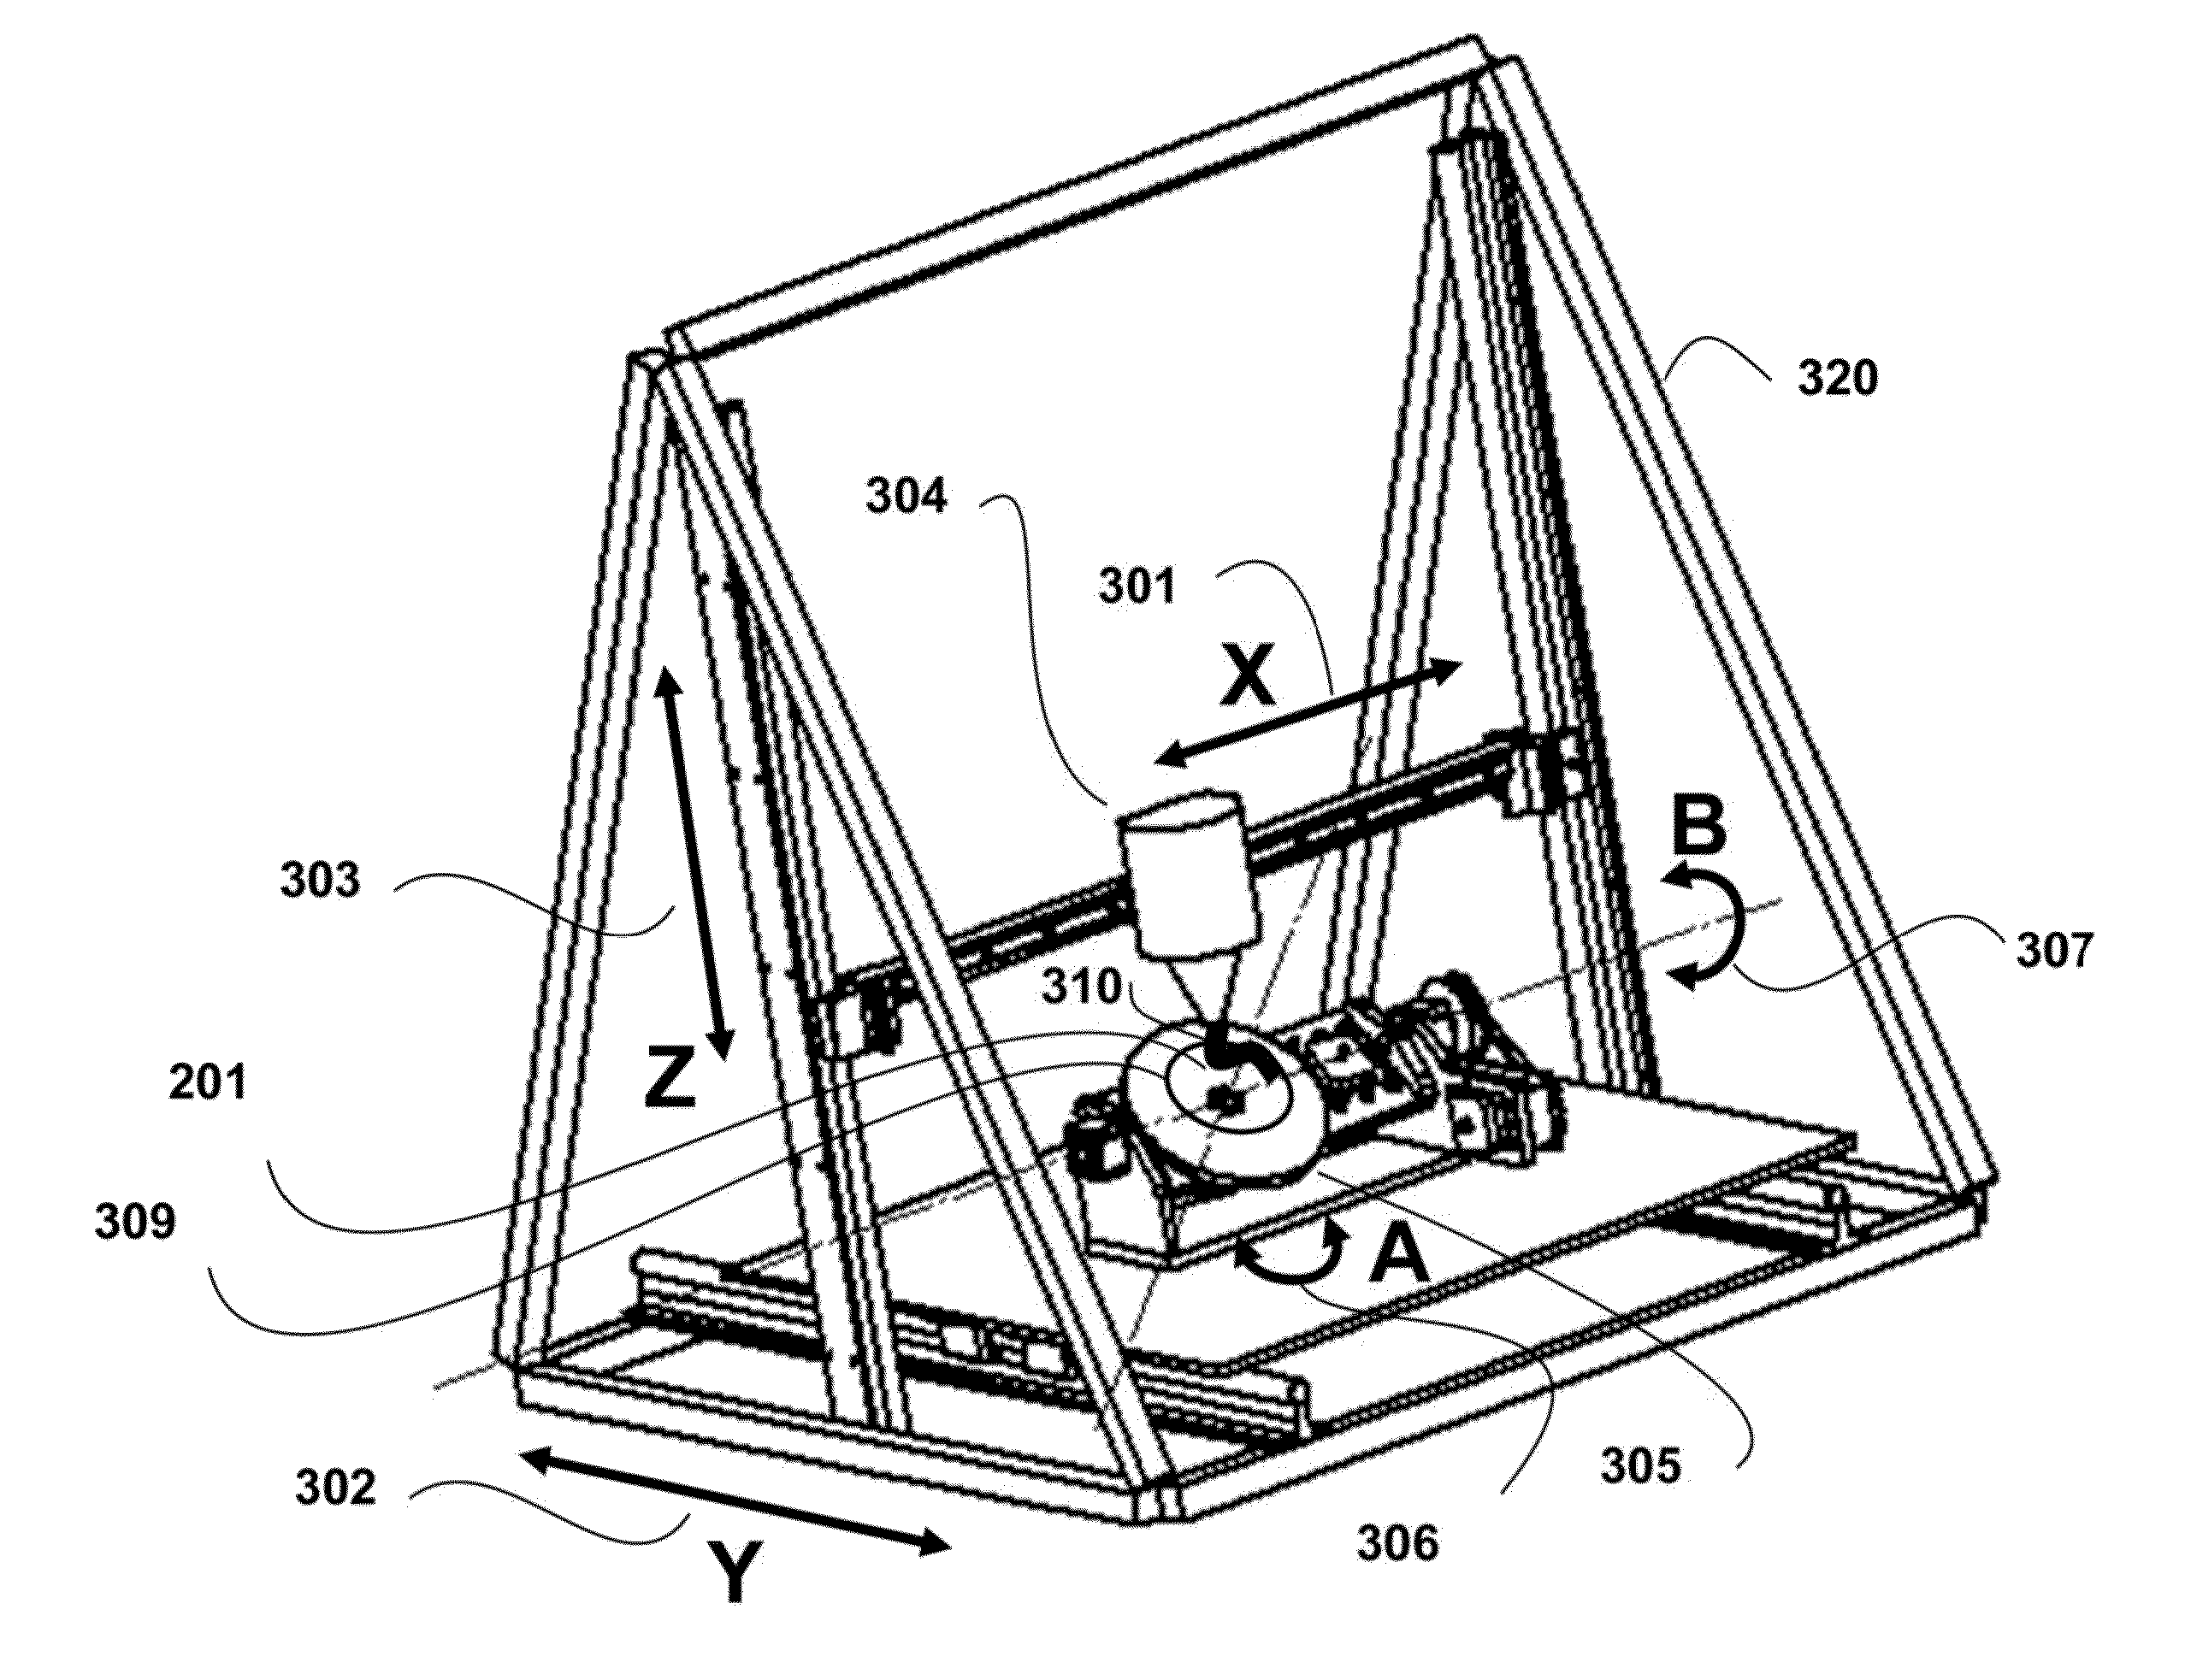 Method and Apparatus for Additively Manufacturing of Objects Based on Tensile Strength